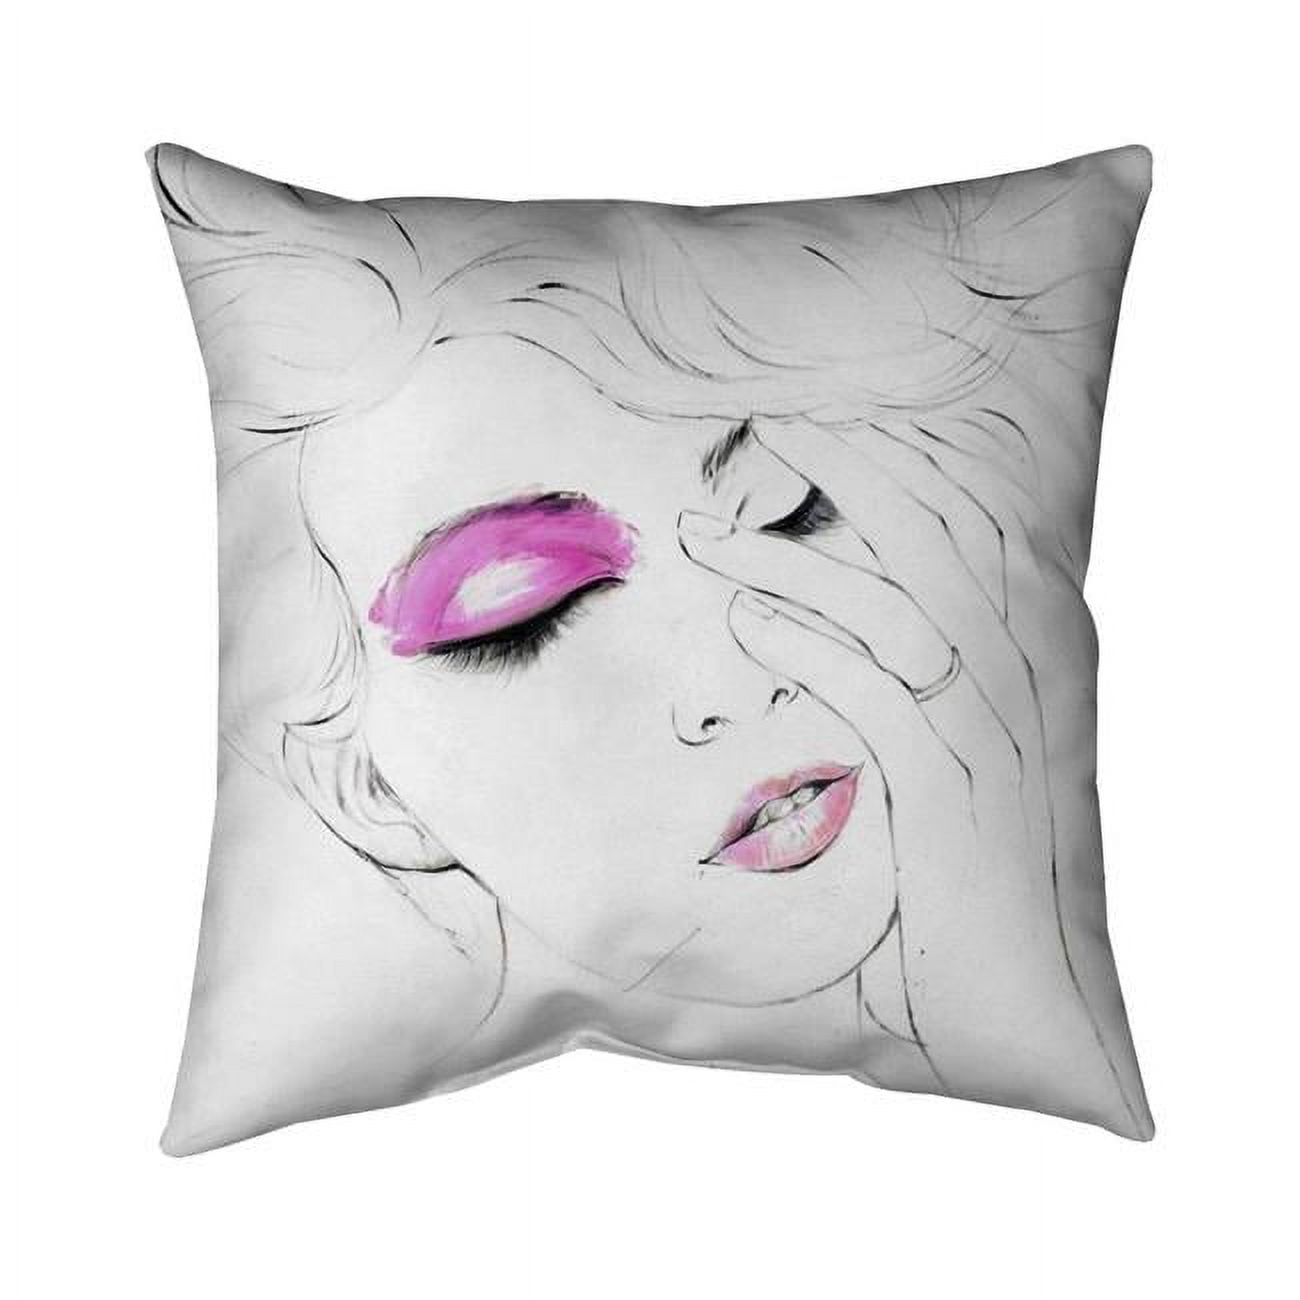 Fondo 18 x 18 in. Pink Makeup-Double Sided Print Indoor Pillow Cover